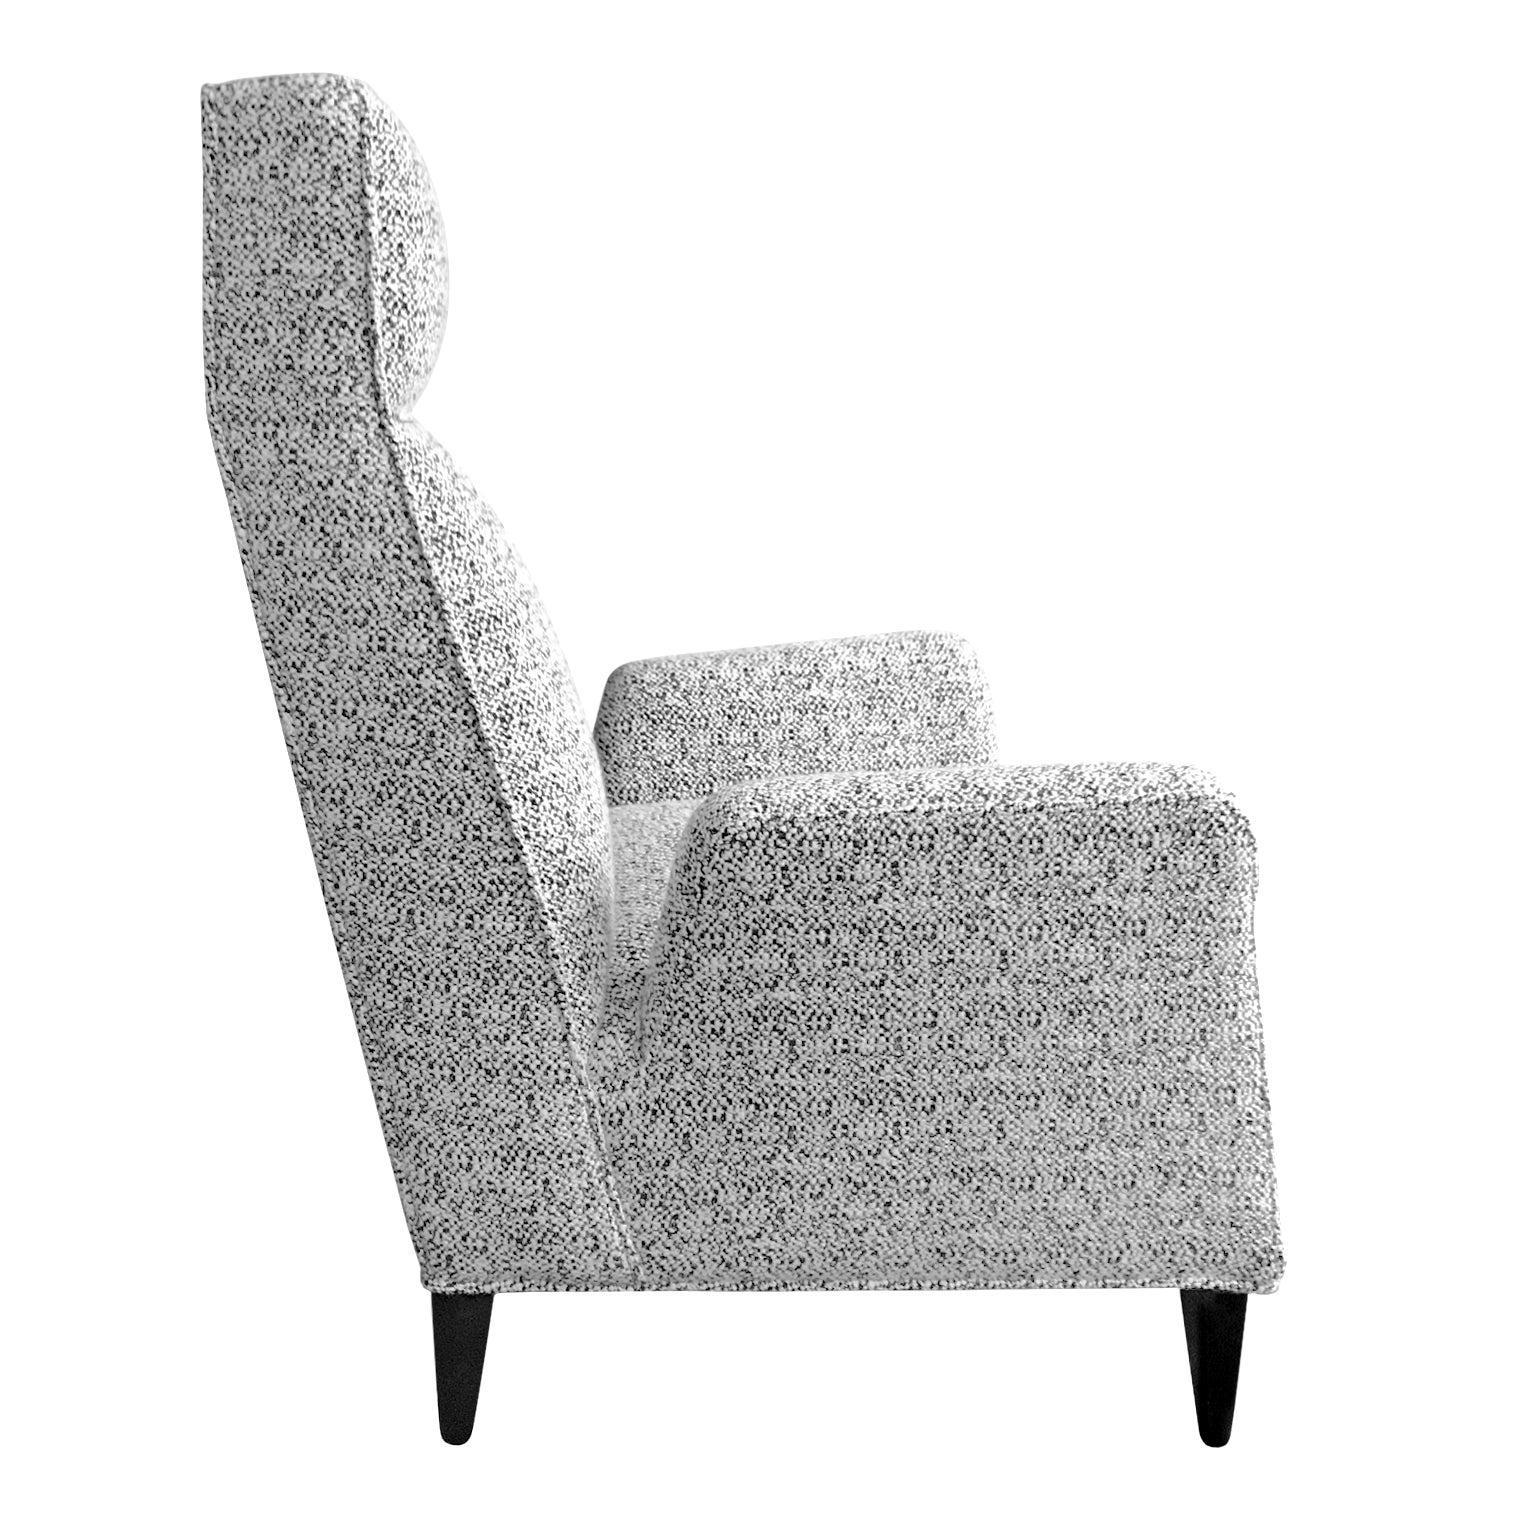 FLAIR Home collection custom Torino high back chair in black and white bouclé.
  